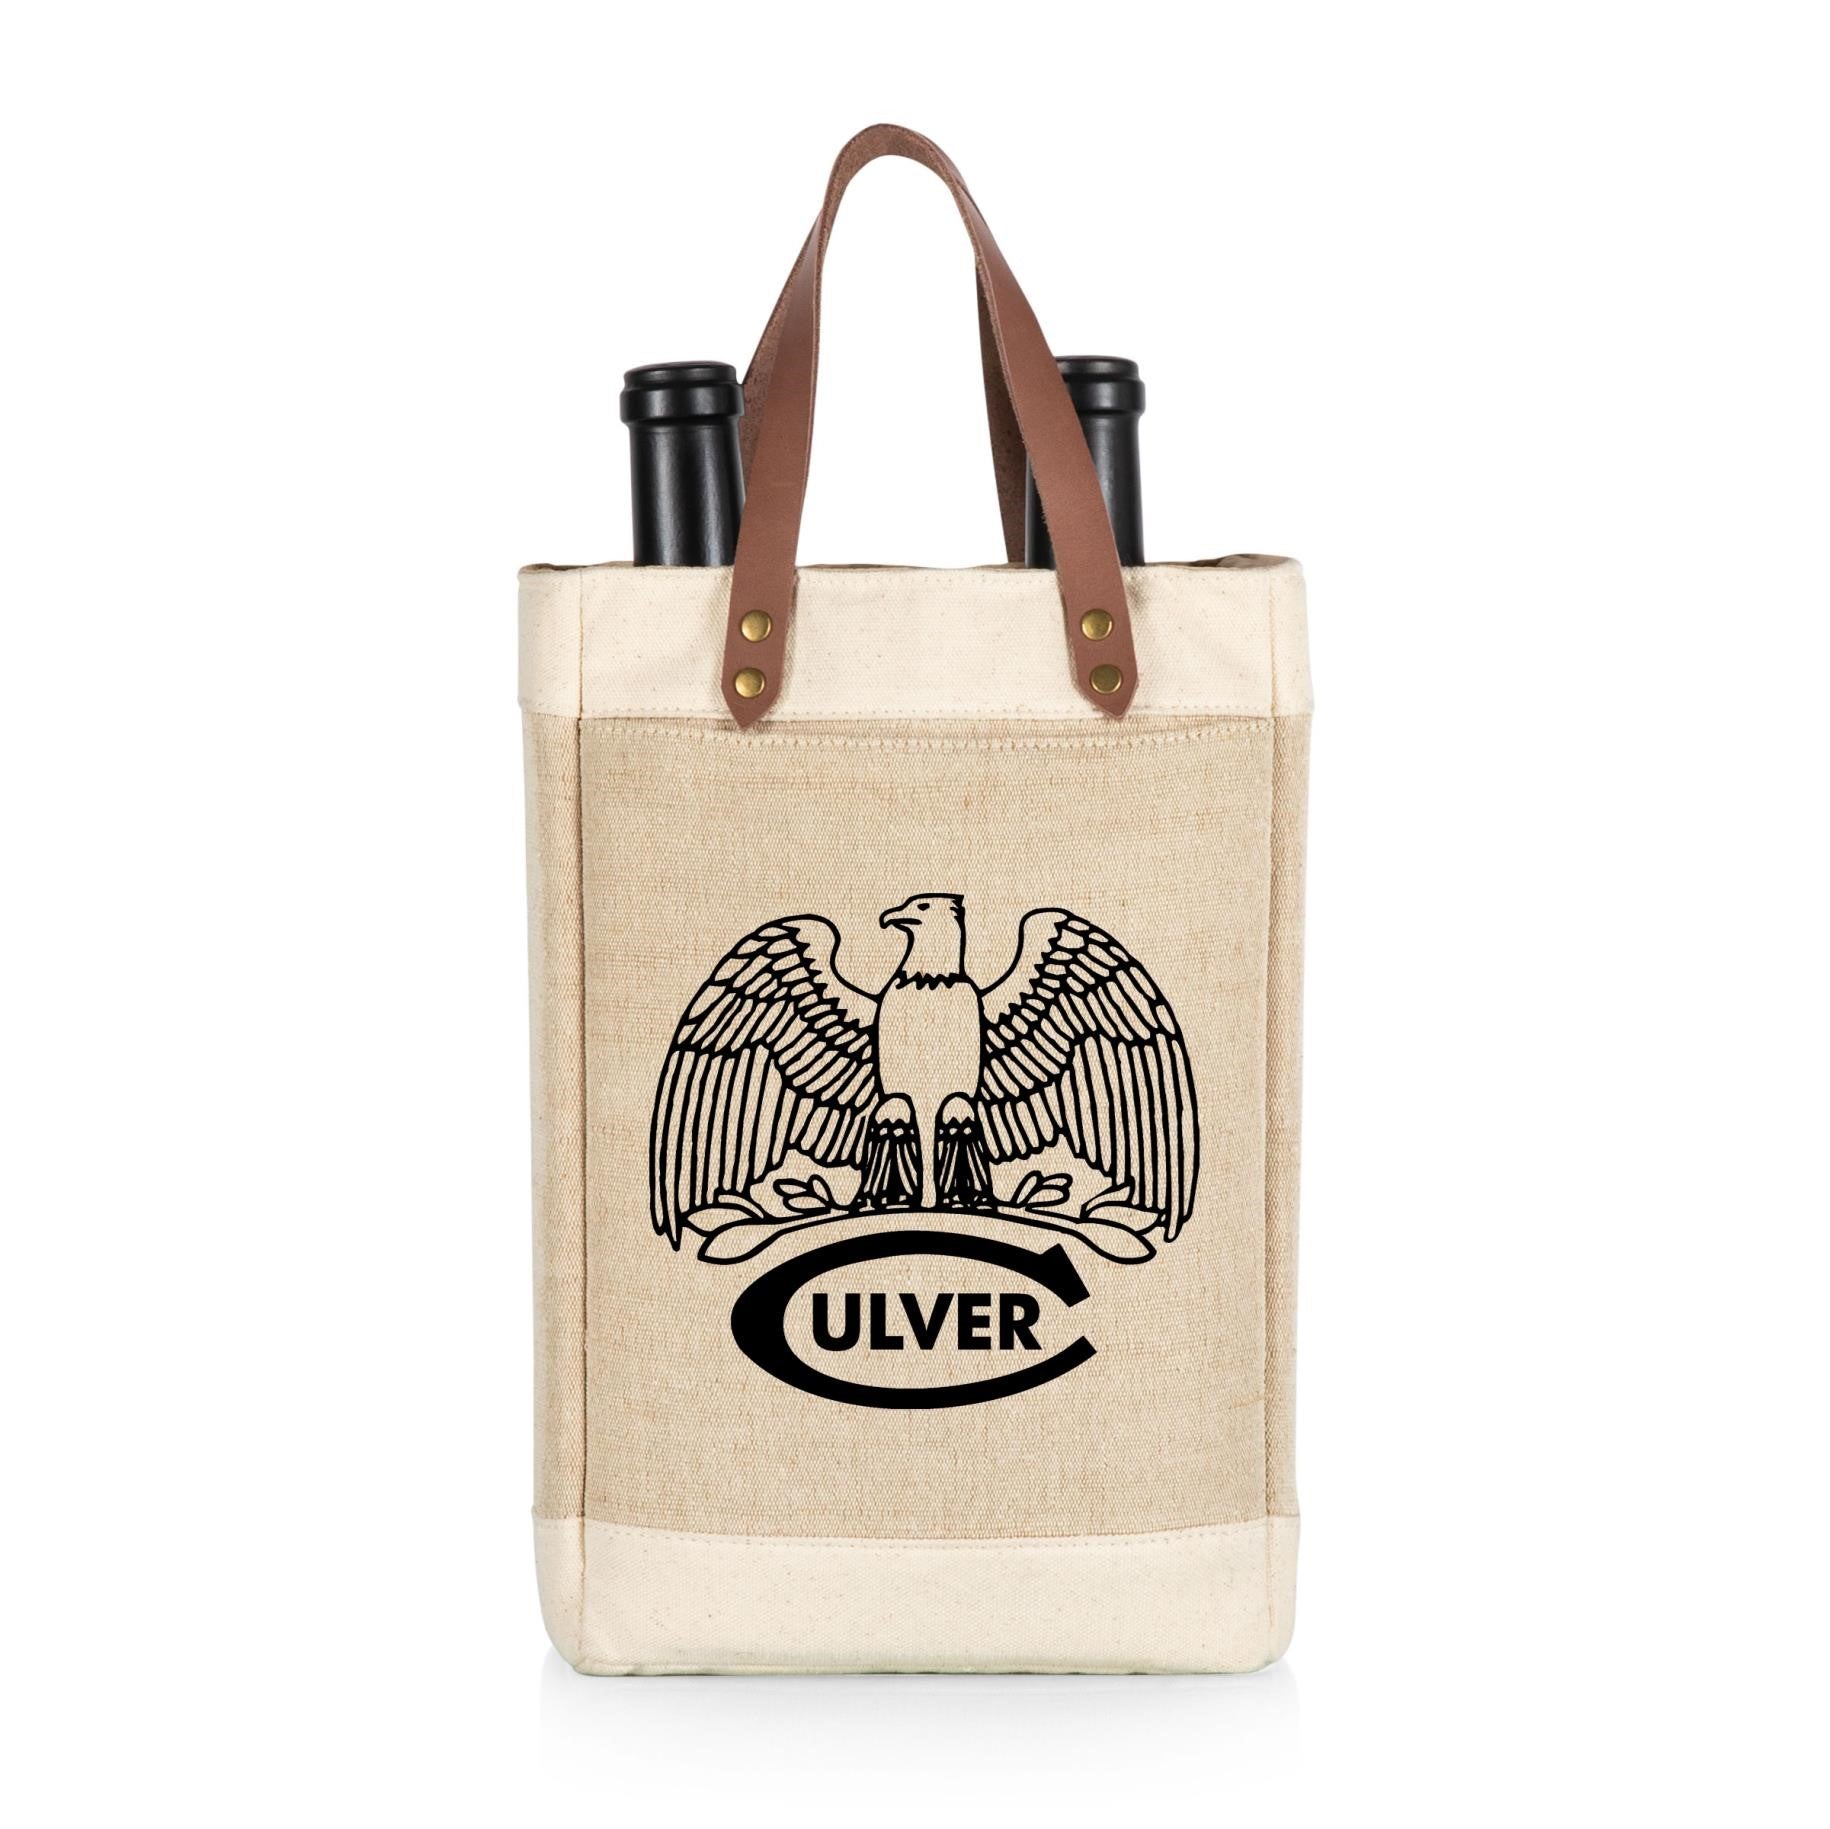 Eagle Culver-C - Pinot Jute Insulated Wine Bag - 2 Bottle - Canvas